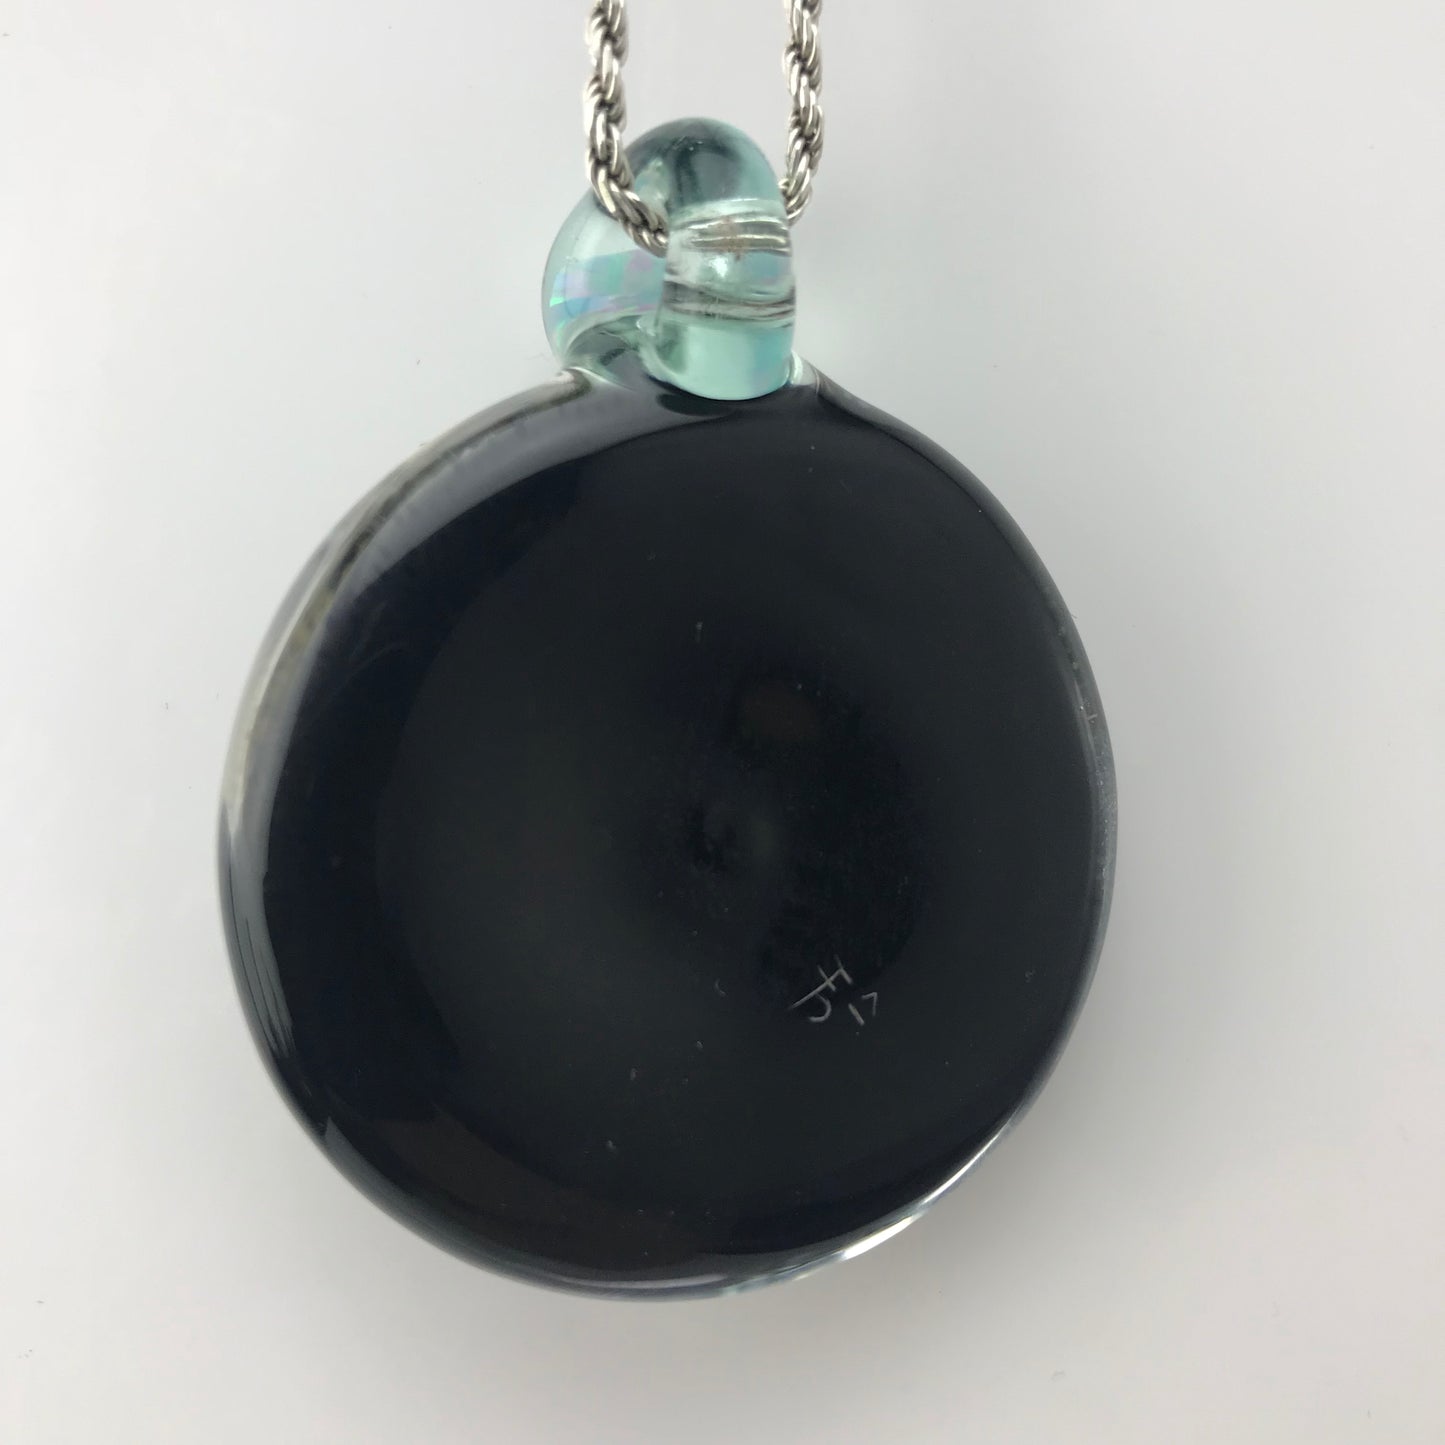 Ship and Lighthouse Doticello Pendant by JH_Glass - The Glass Mule